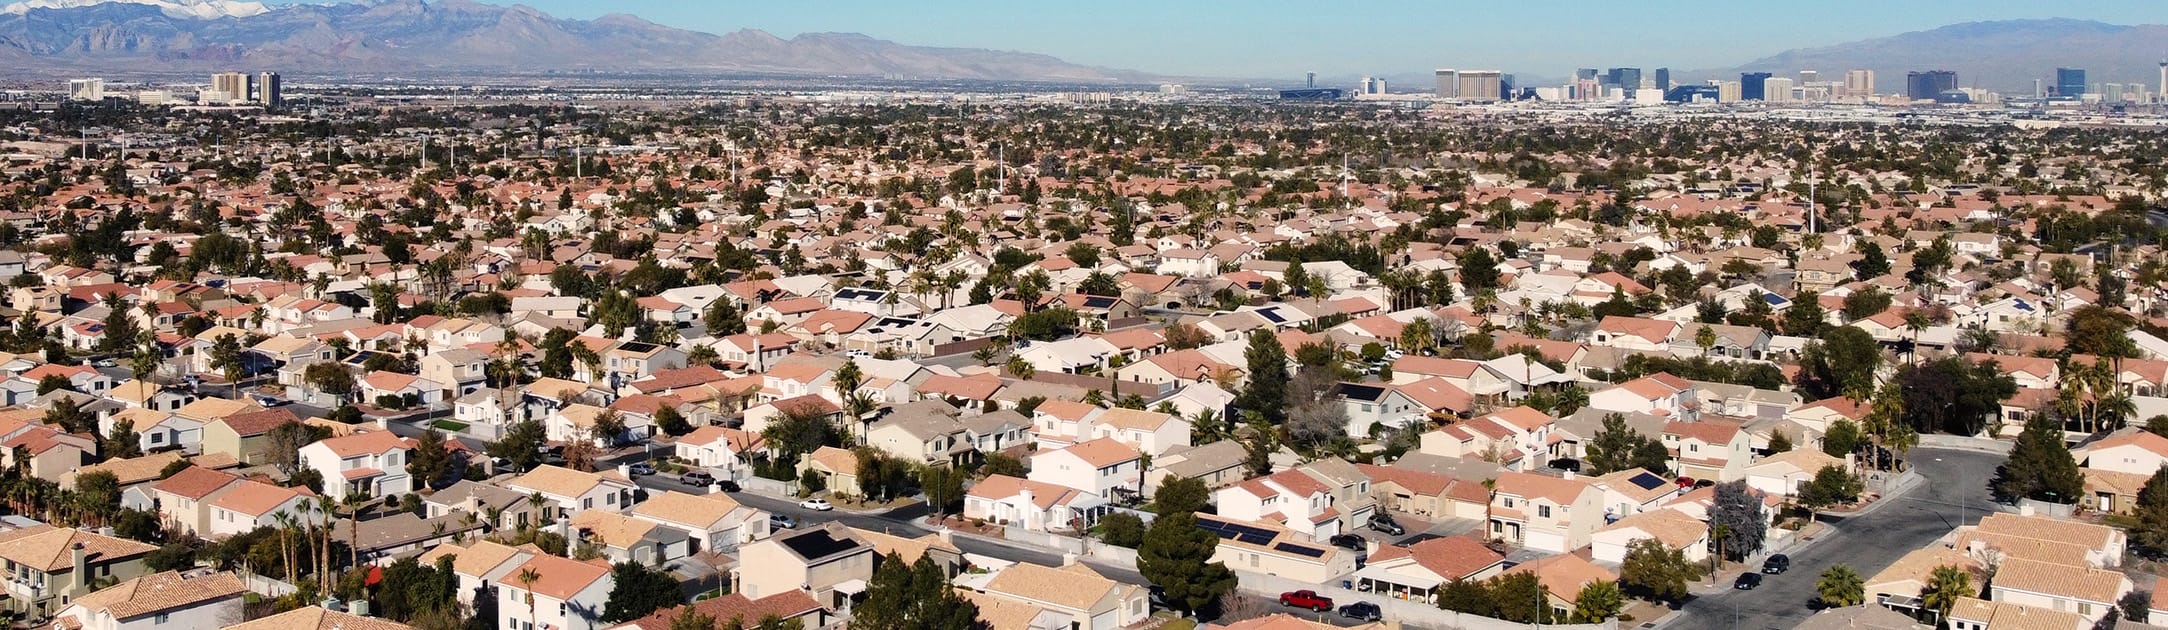 Aerial view of neighborhood with high rises and mountains in the background.